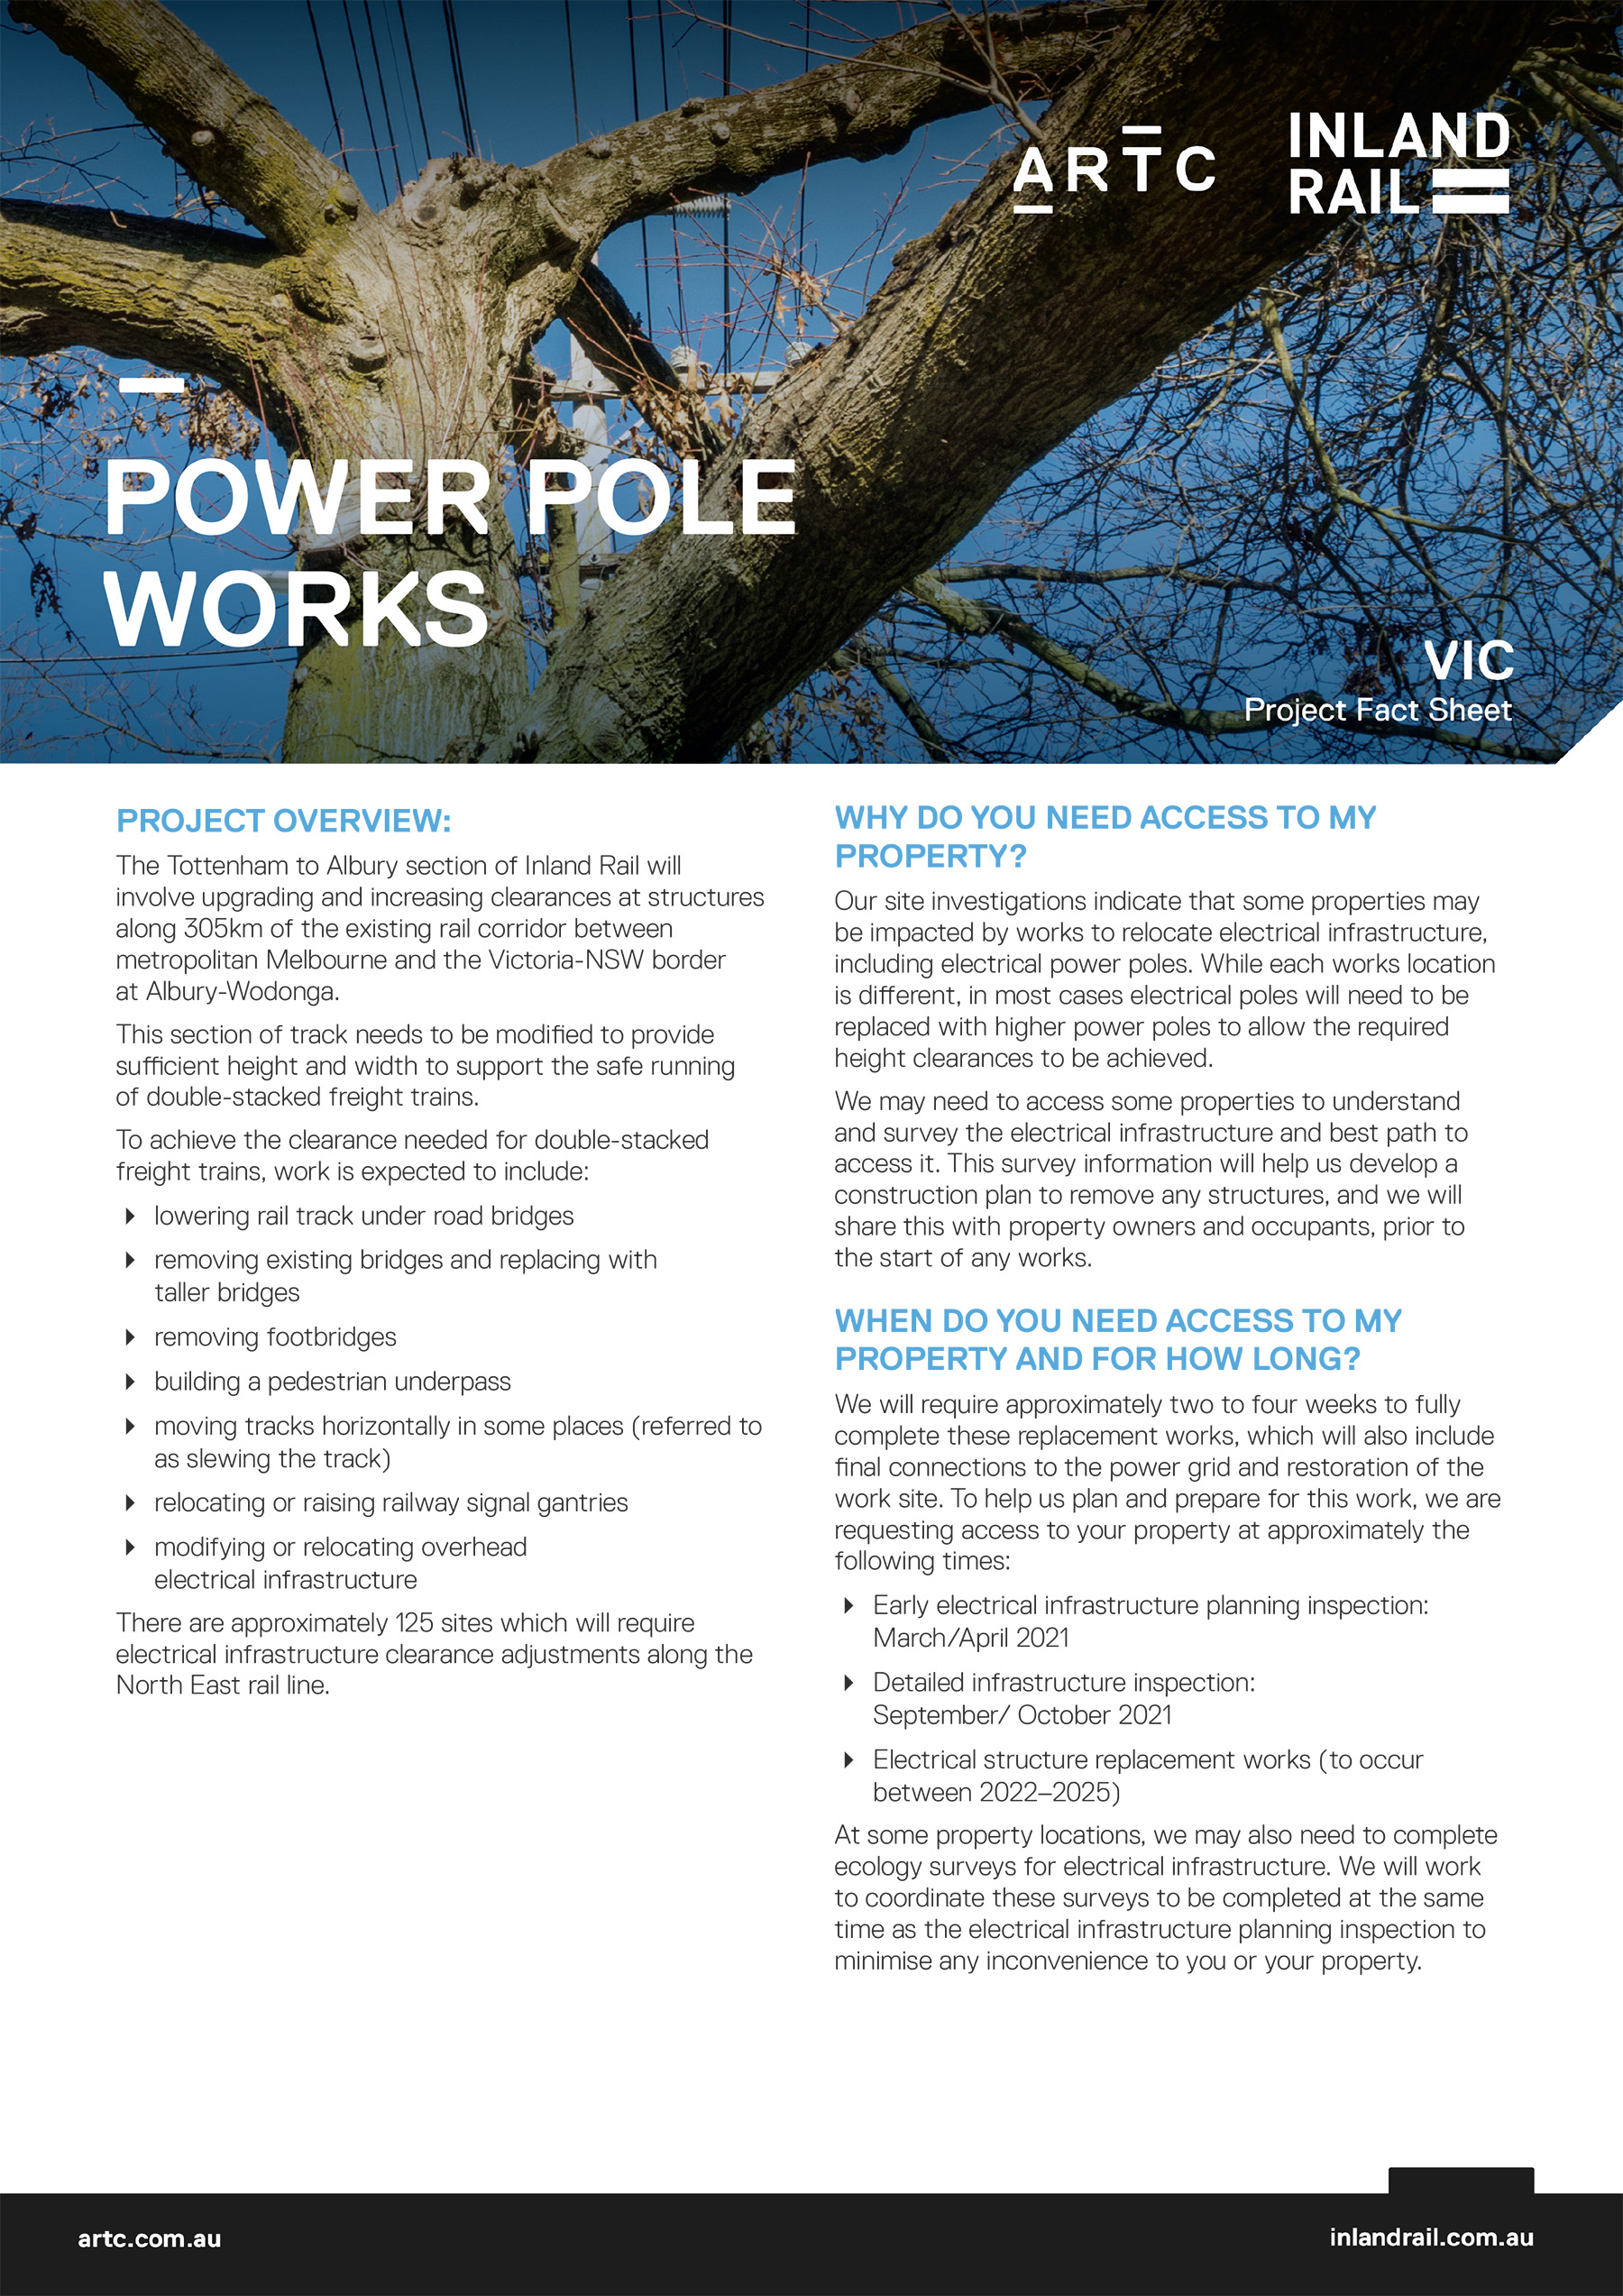 ARTC Inland Rail power pole works project fact sheet